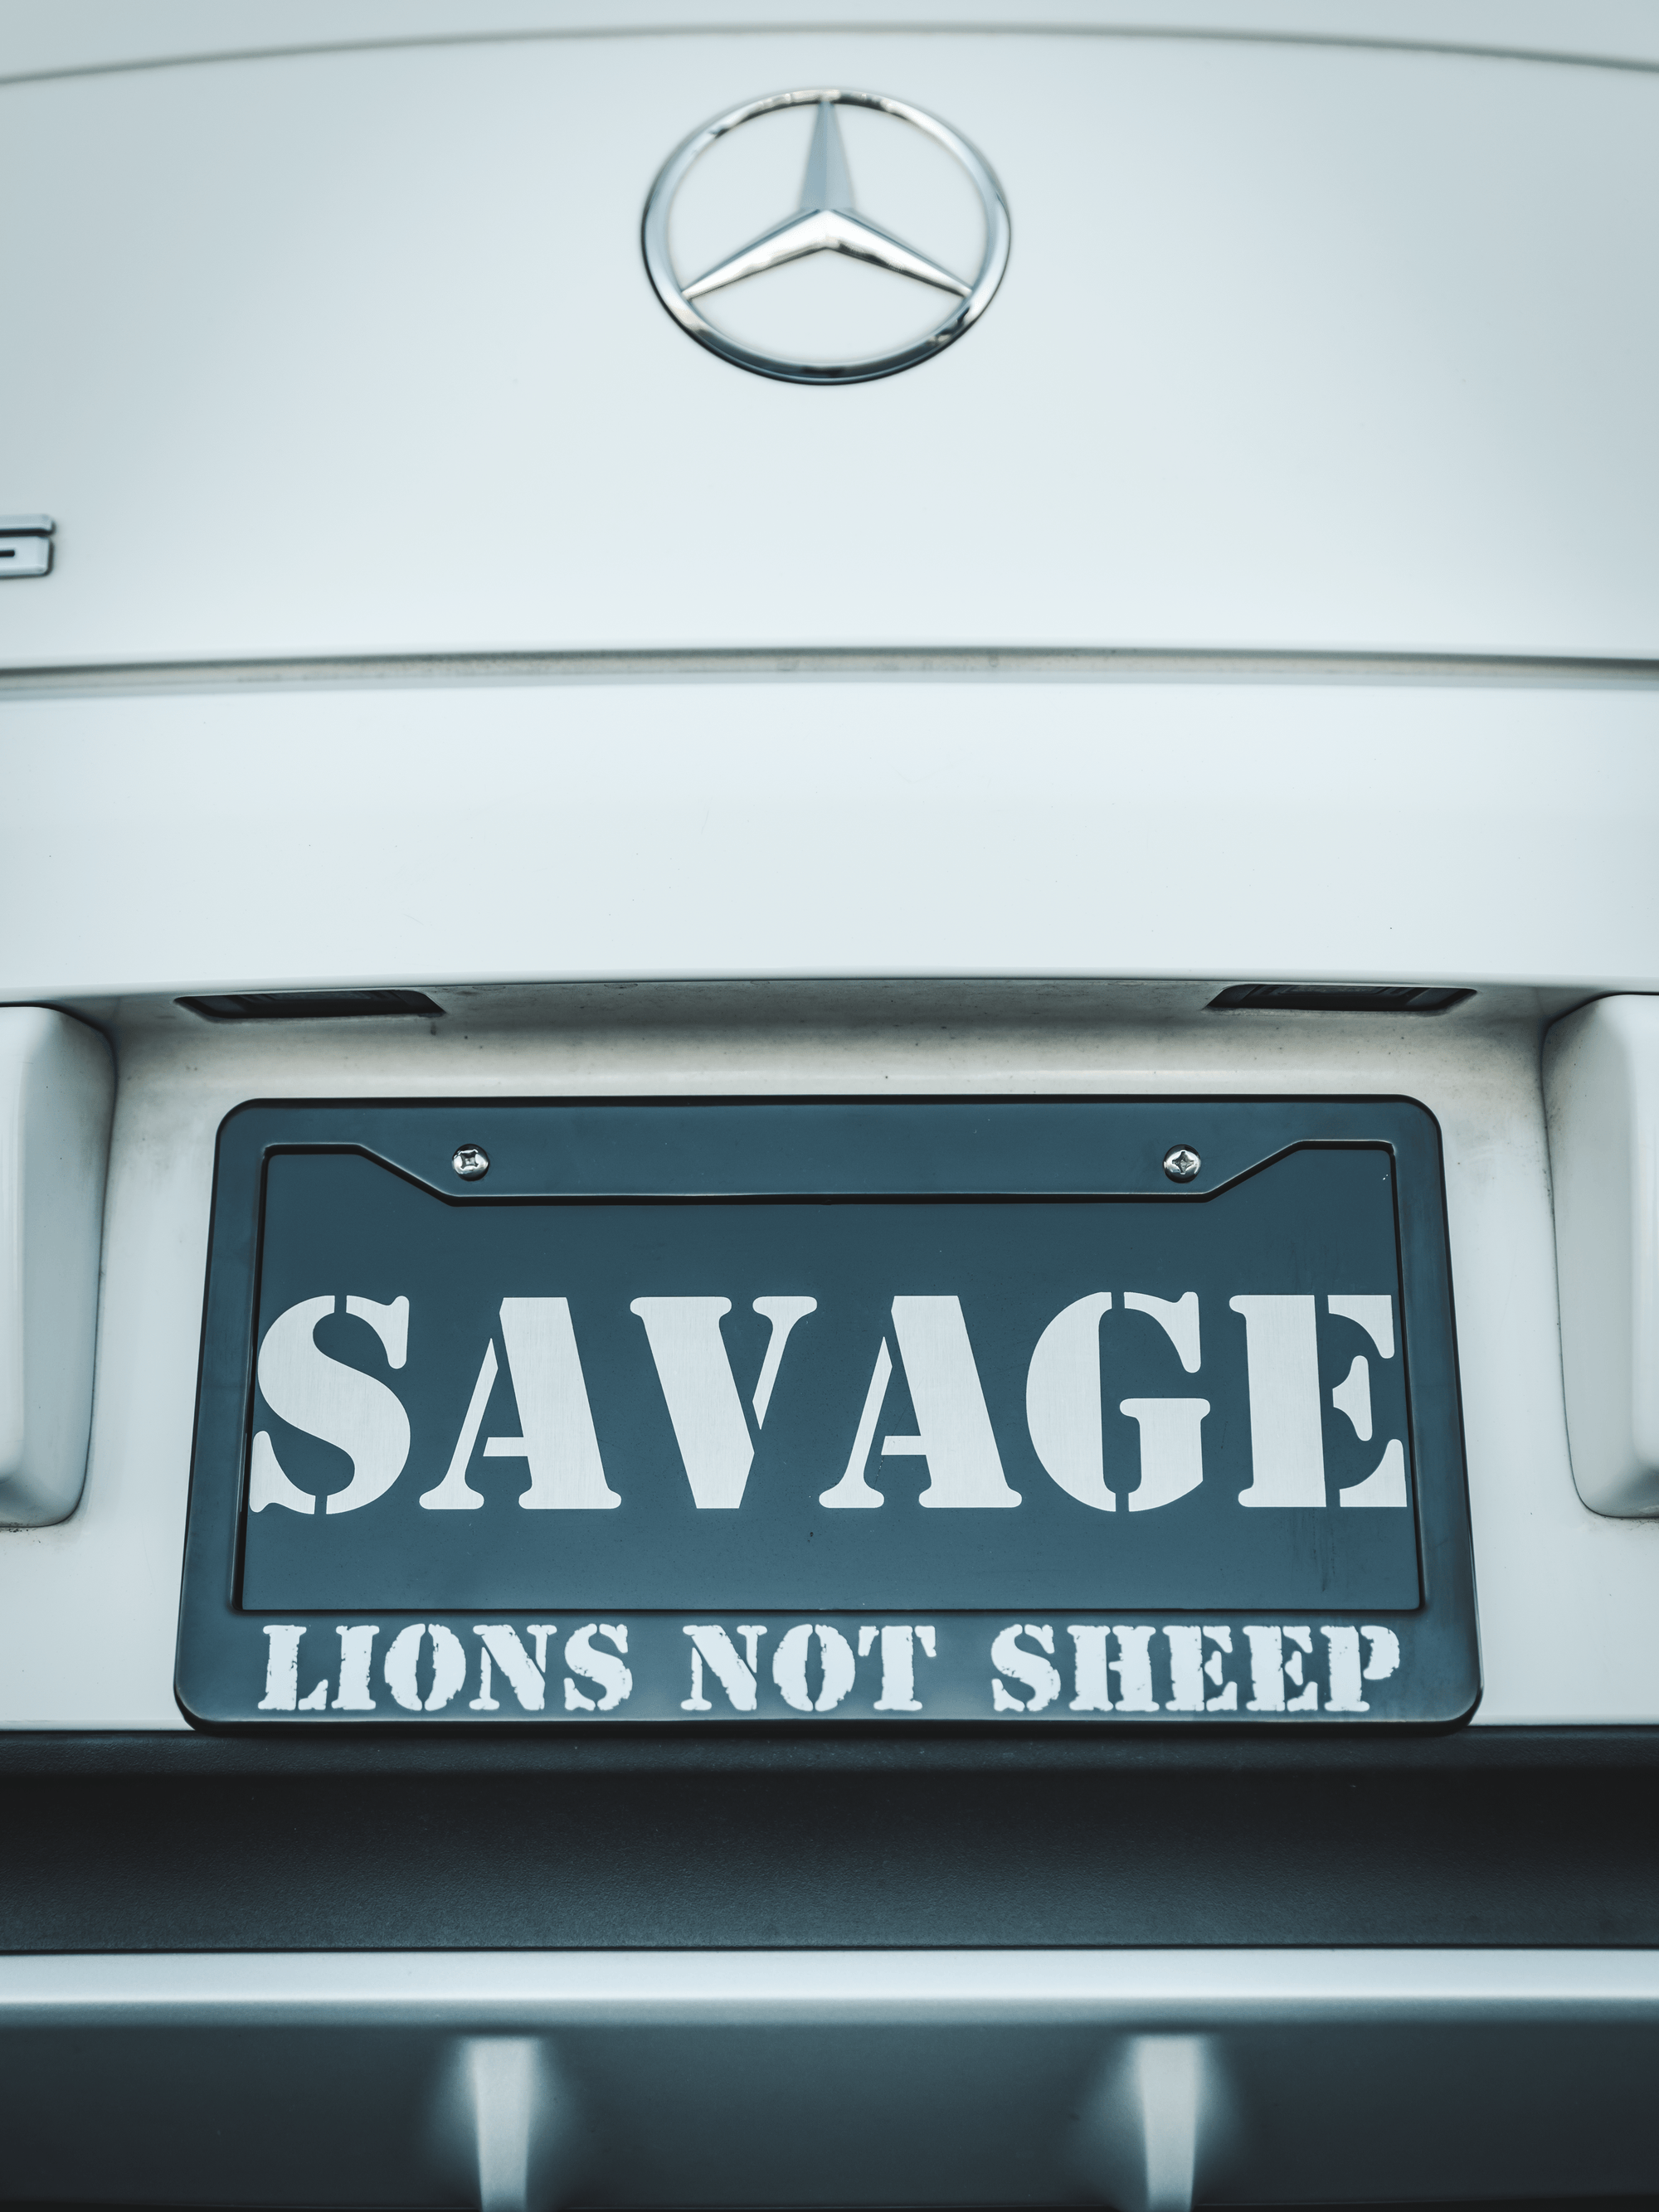 Lions Not Sheep "OG" License Plate Cover - Lions Not Sheep ®